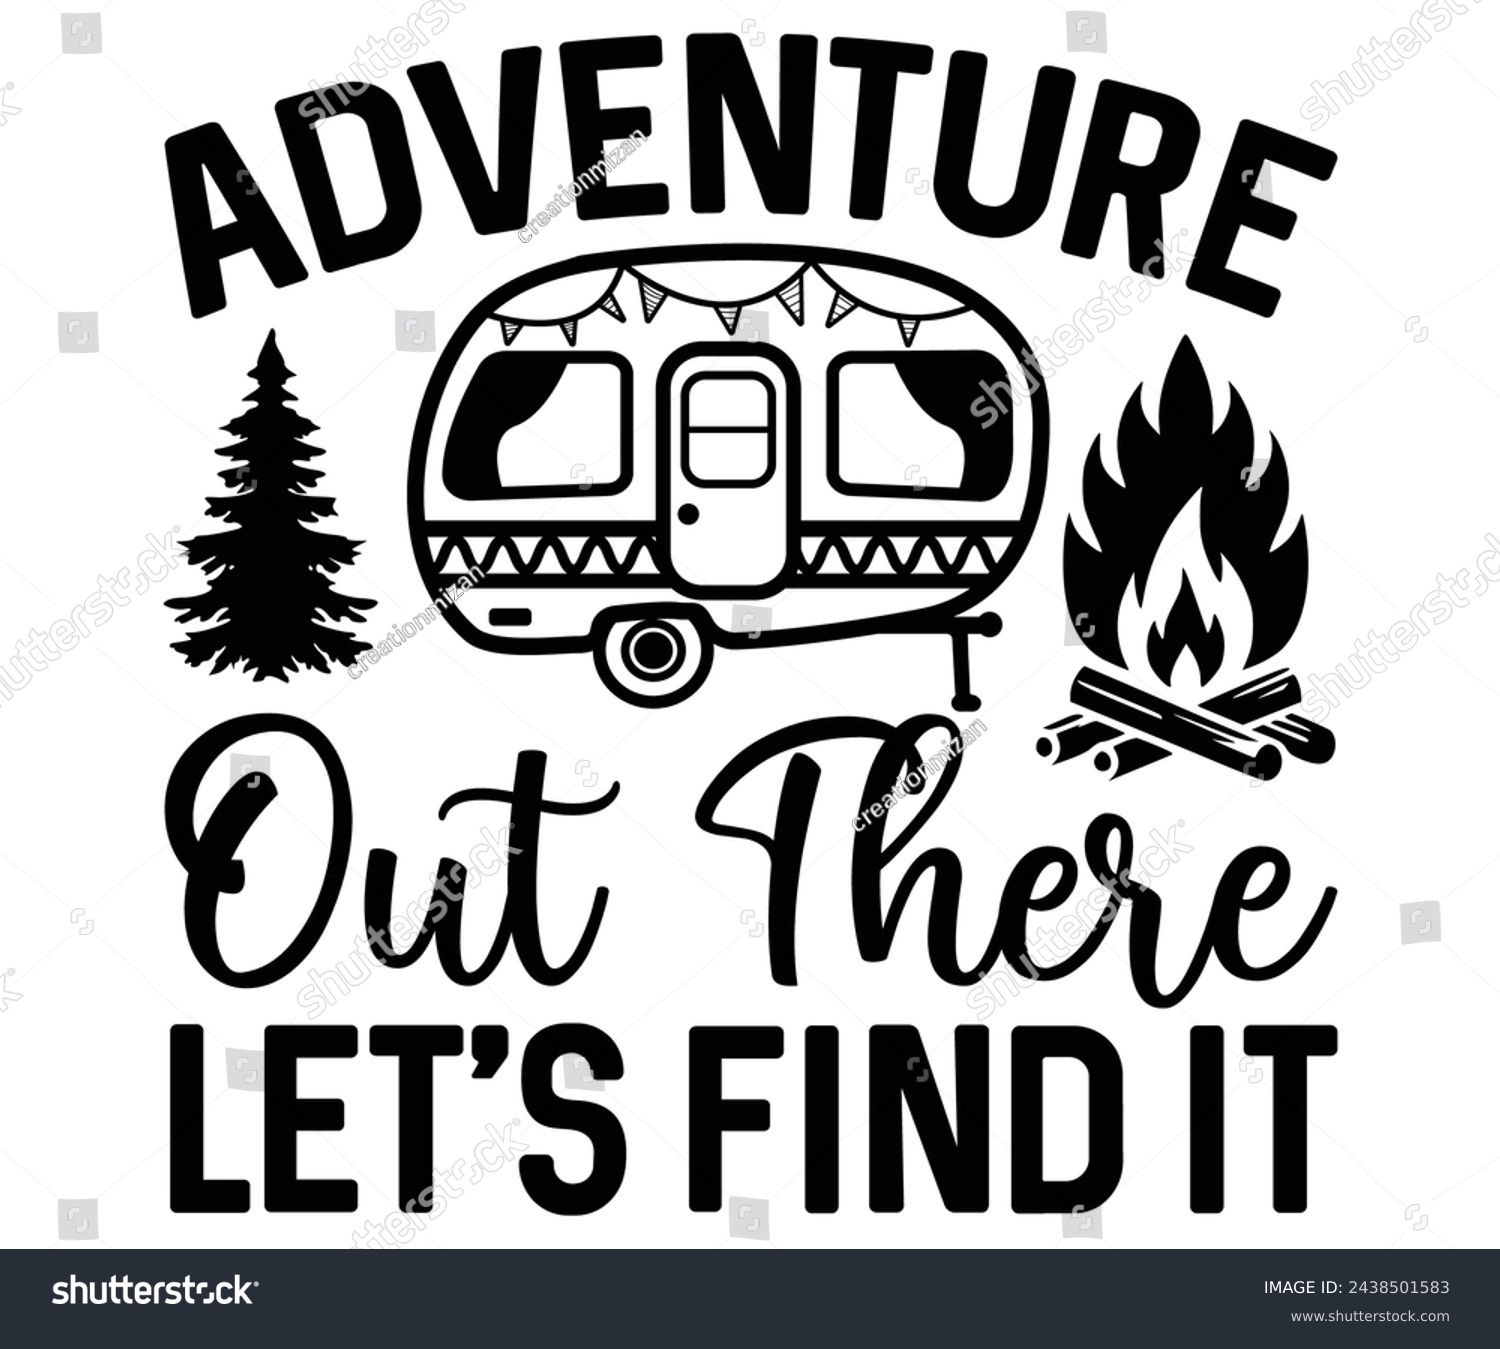 SVG of Adventure Out There Let's Find it Svg,Camping Svg,Hiking,Funny Camping,Adventure,Summer Camp,Happy Camper,Camp Life,Camp Saying,Camping Shirt svg